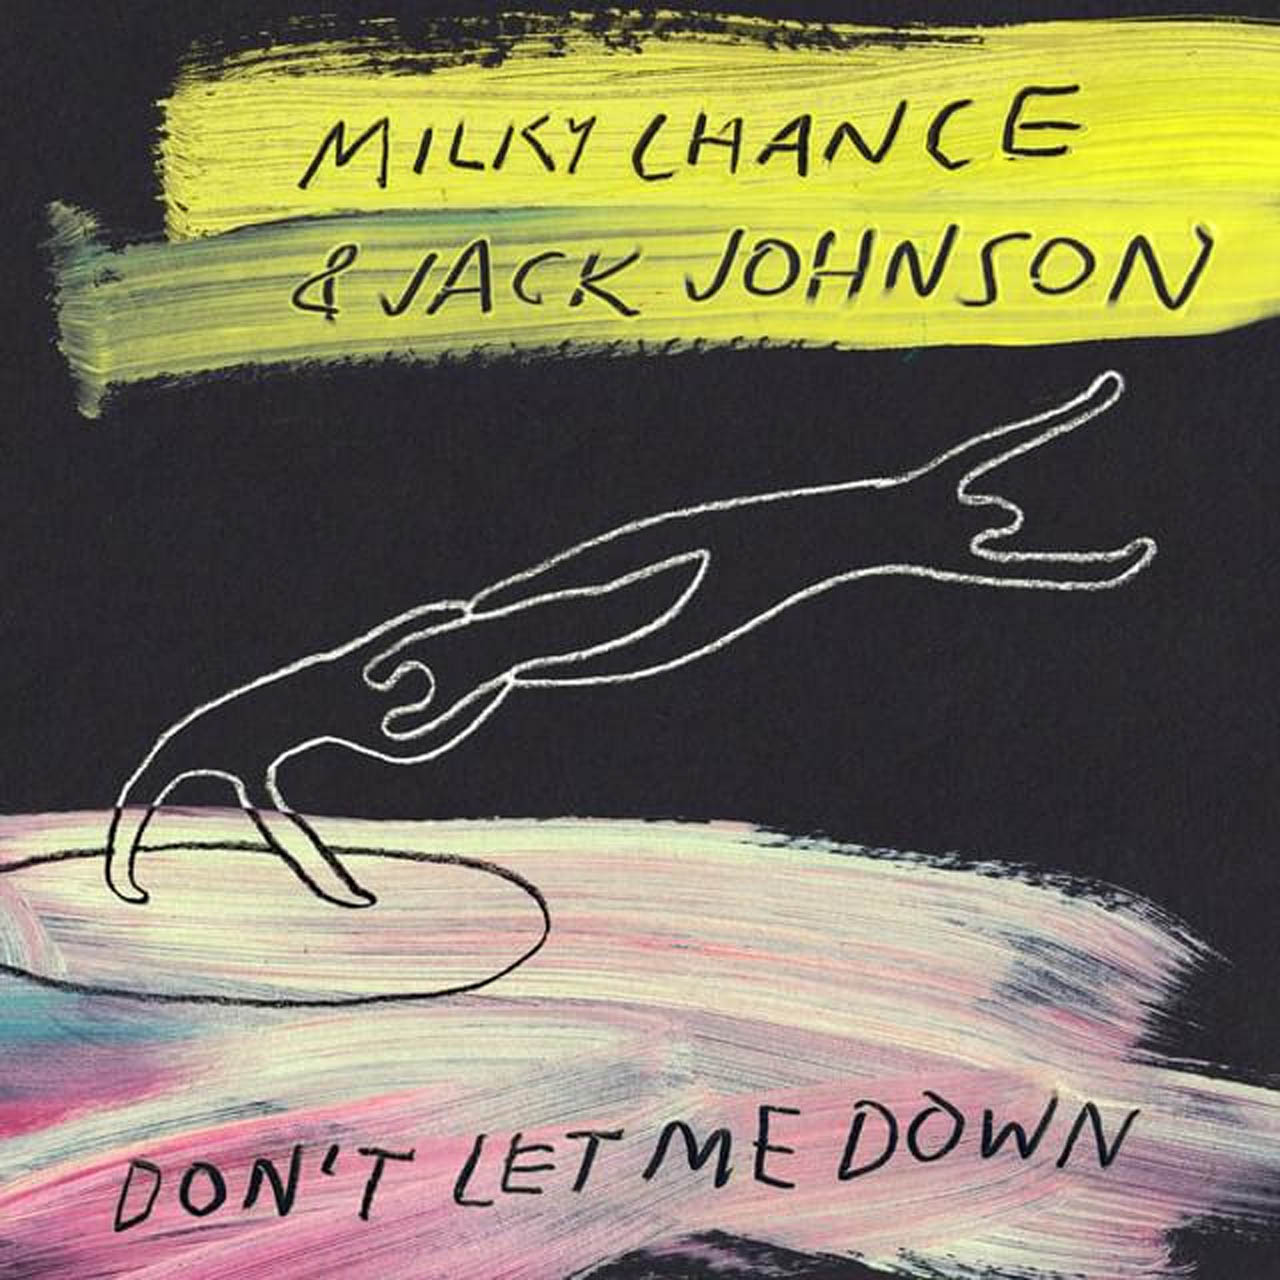 Milky Chance and Jack Johnson - Don't Let Me Down